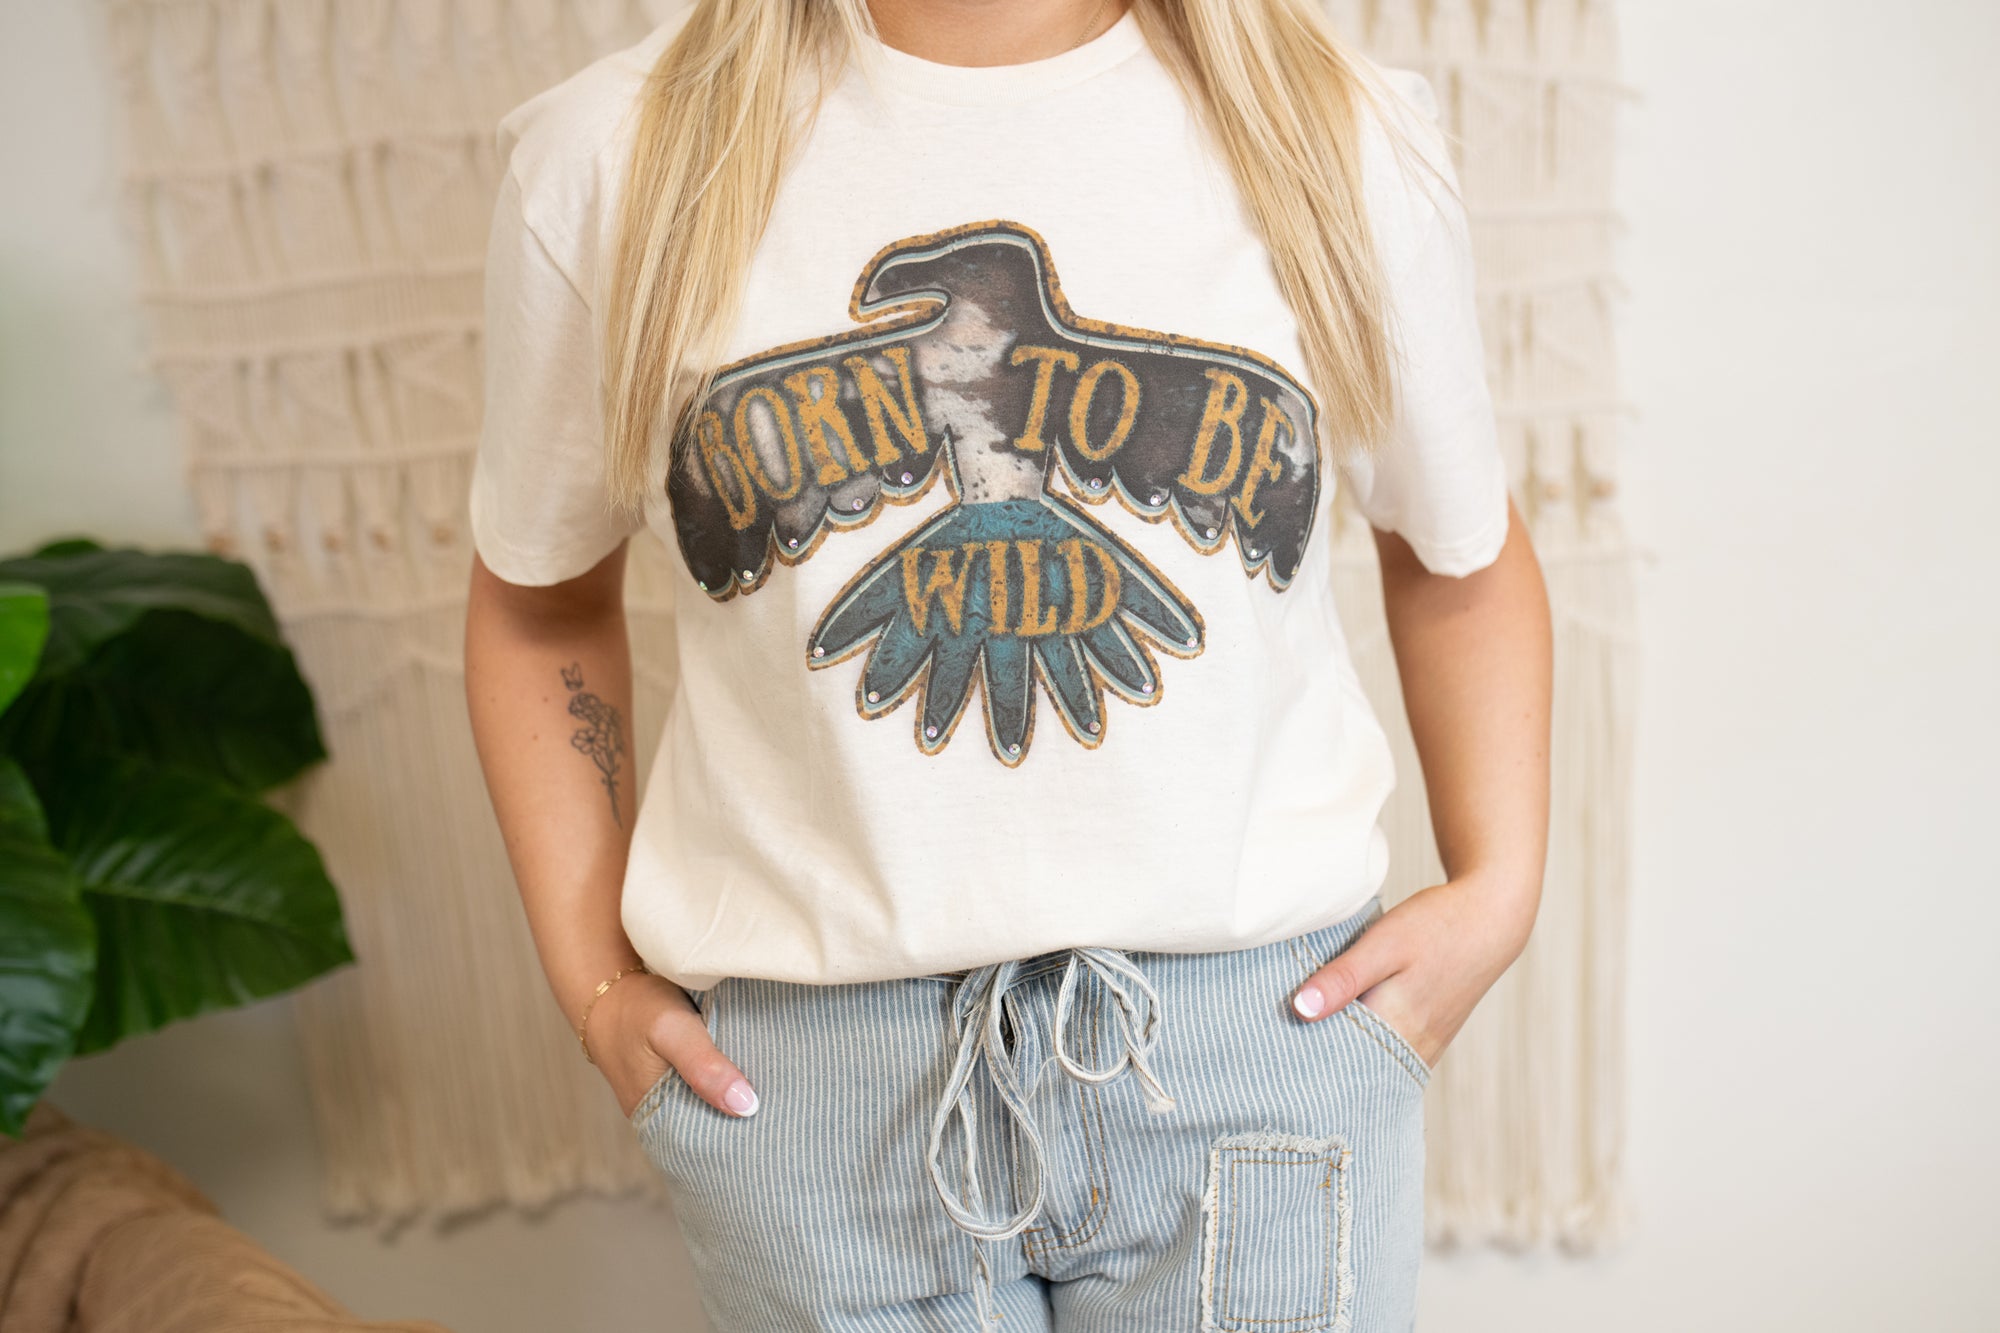 Born To Be Wild Graphic Tee with Bling